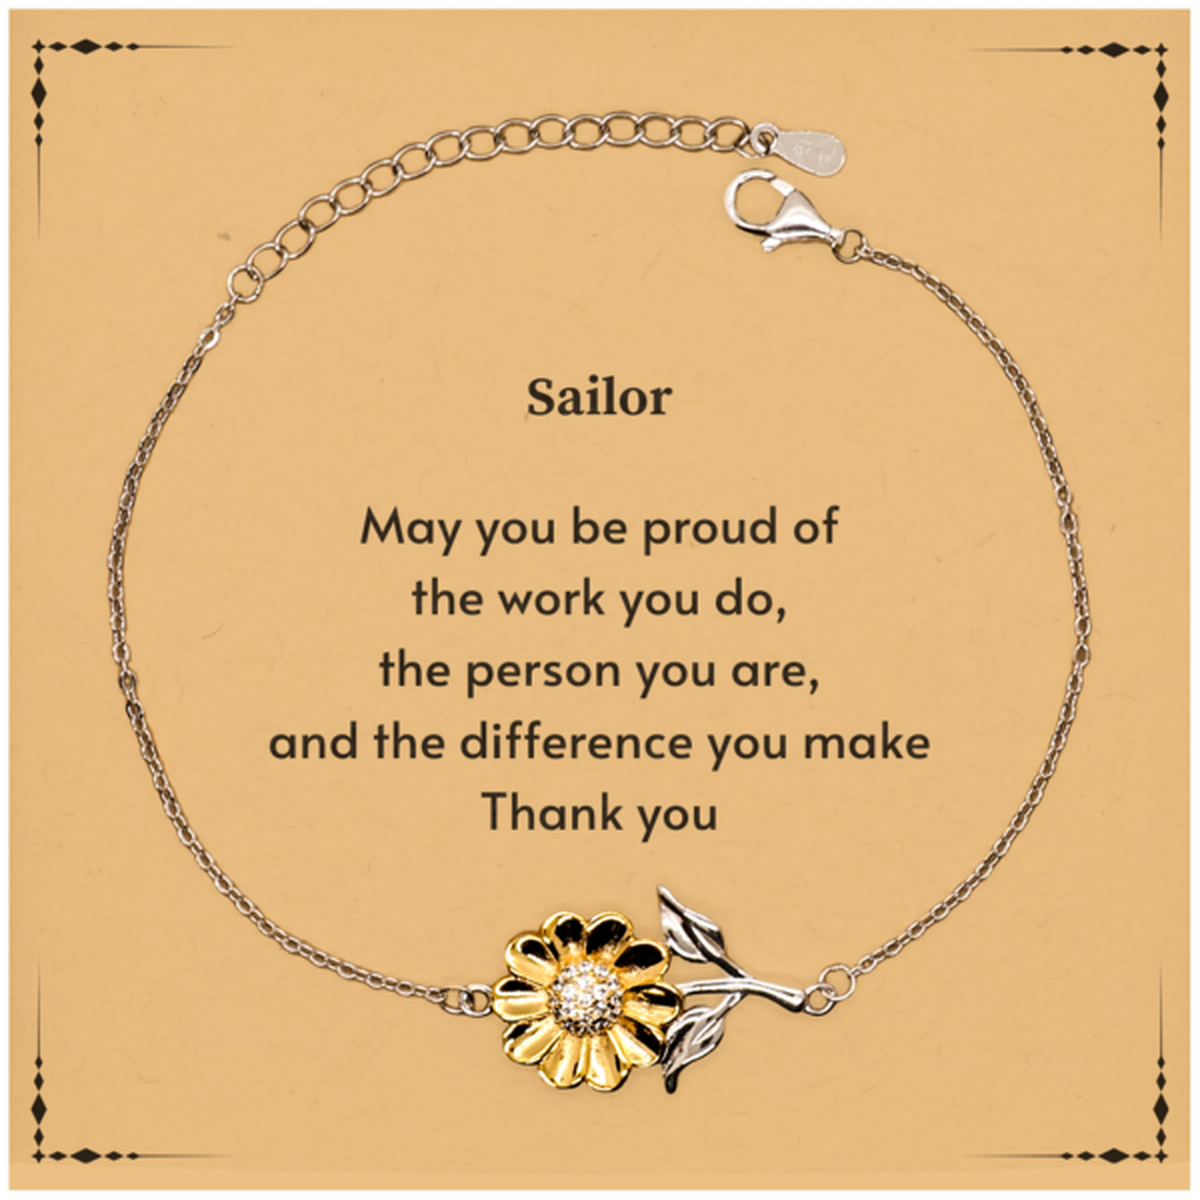 Heartwarming Sunflower Bracelet Retirement Coworkers Gifts for Sailor, Sailor May You be proud of the work you do, the person you are Gifts for Boss Men Women Friends